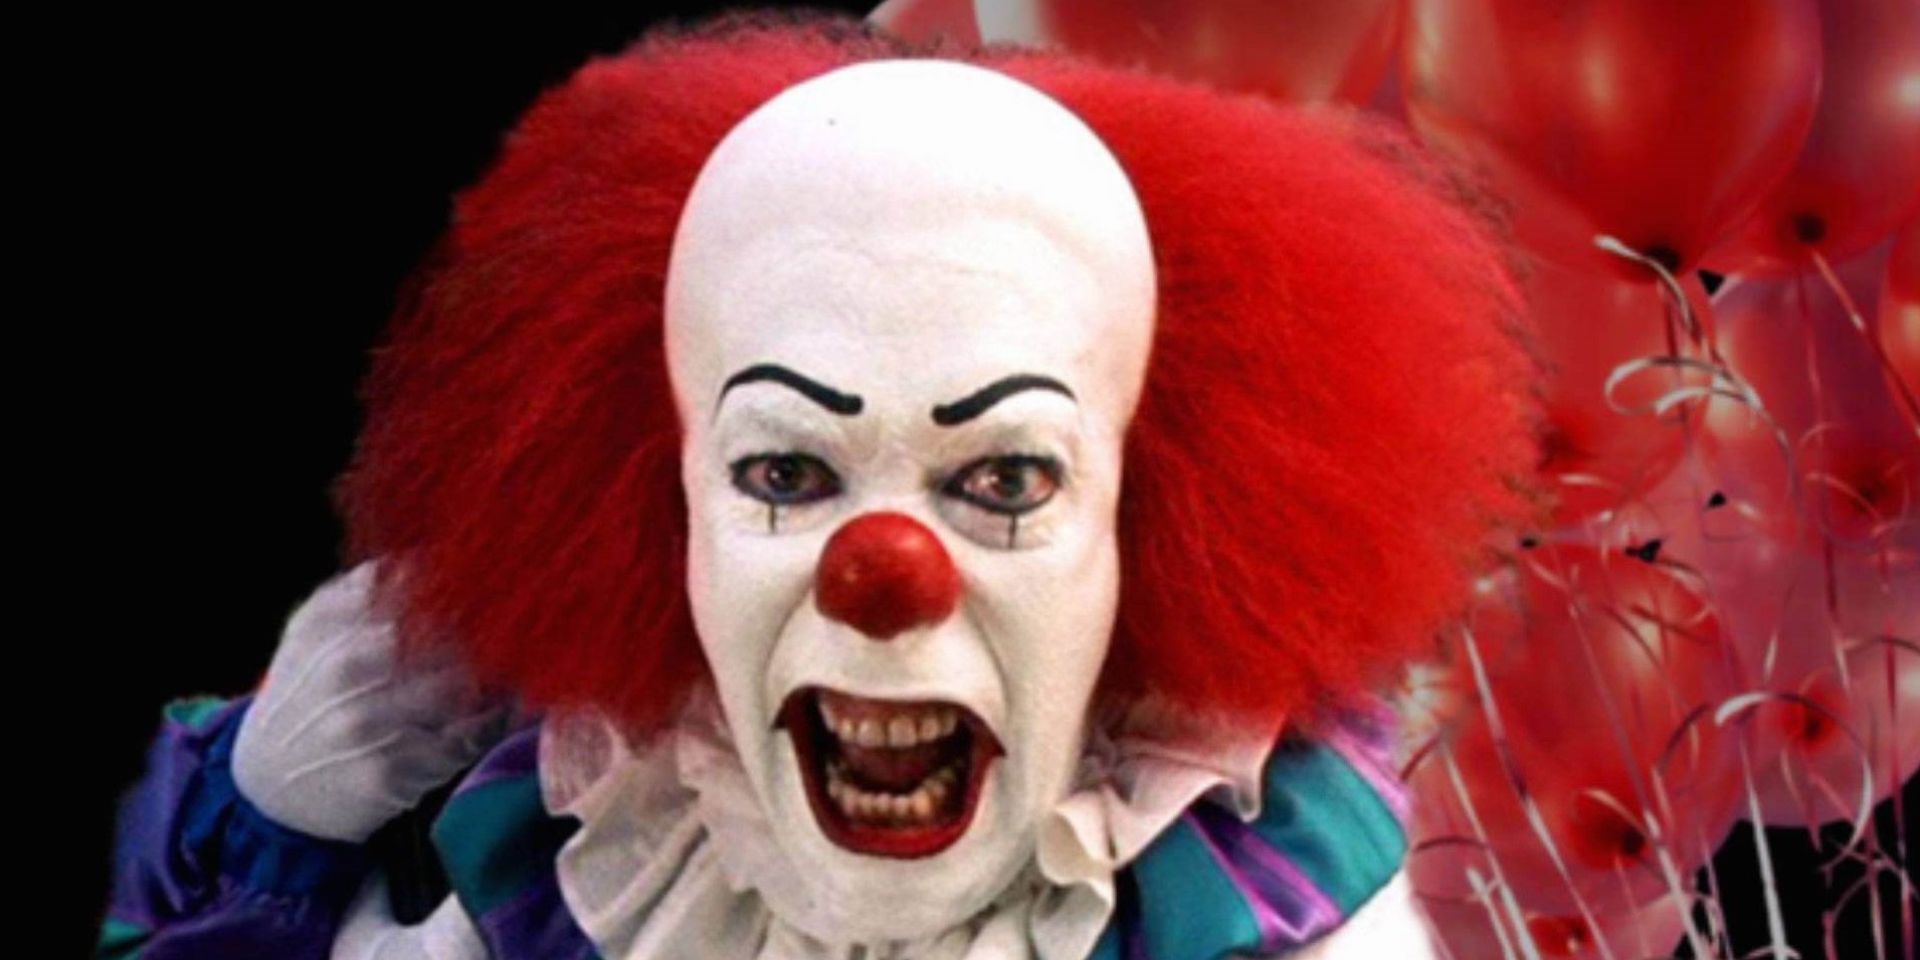 evil clown Pennywise